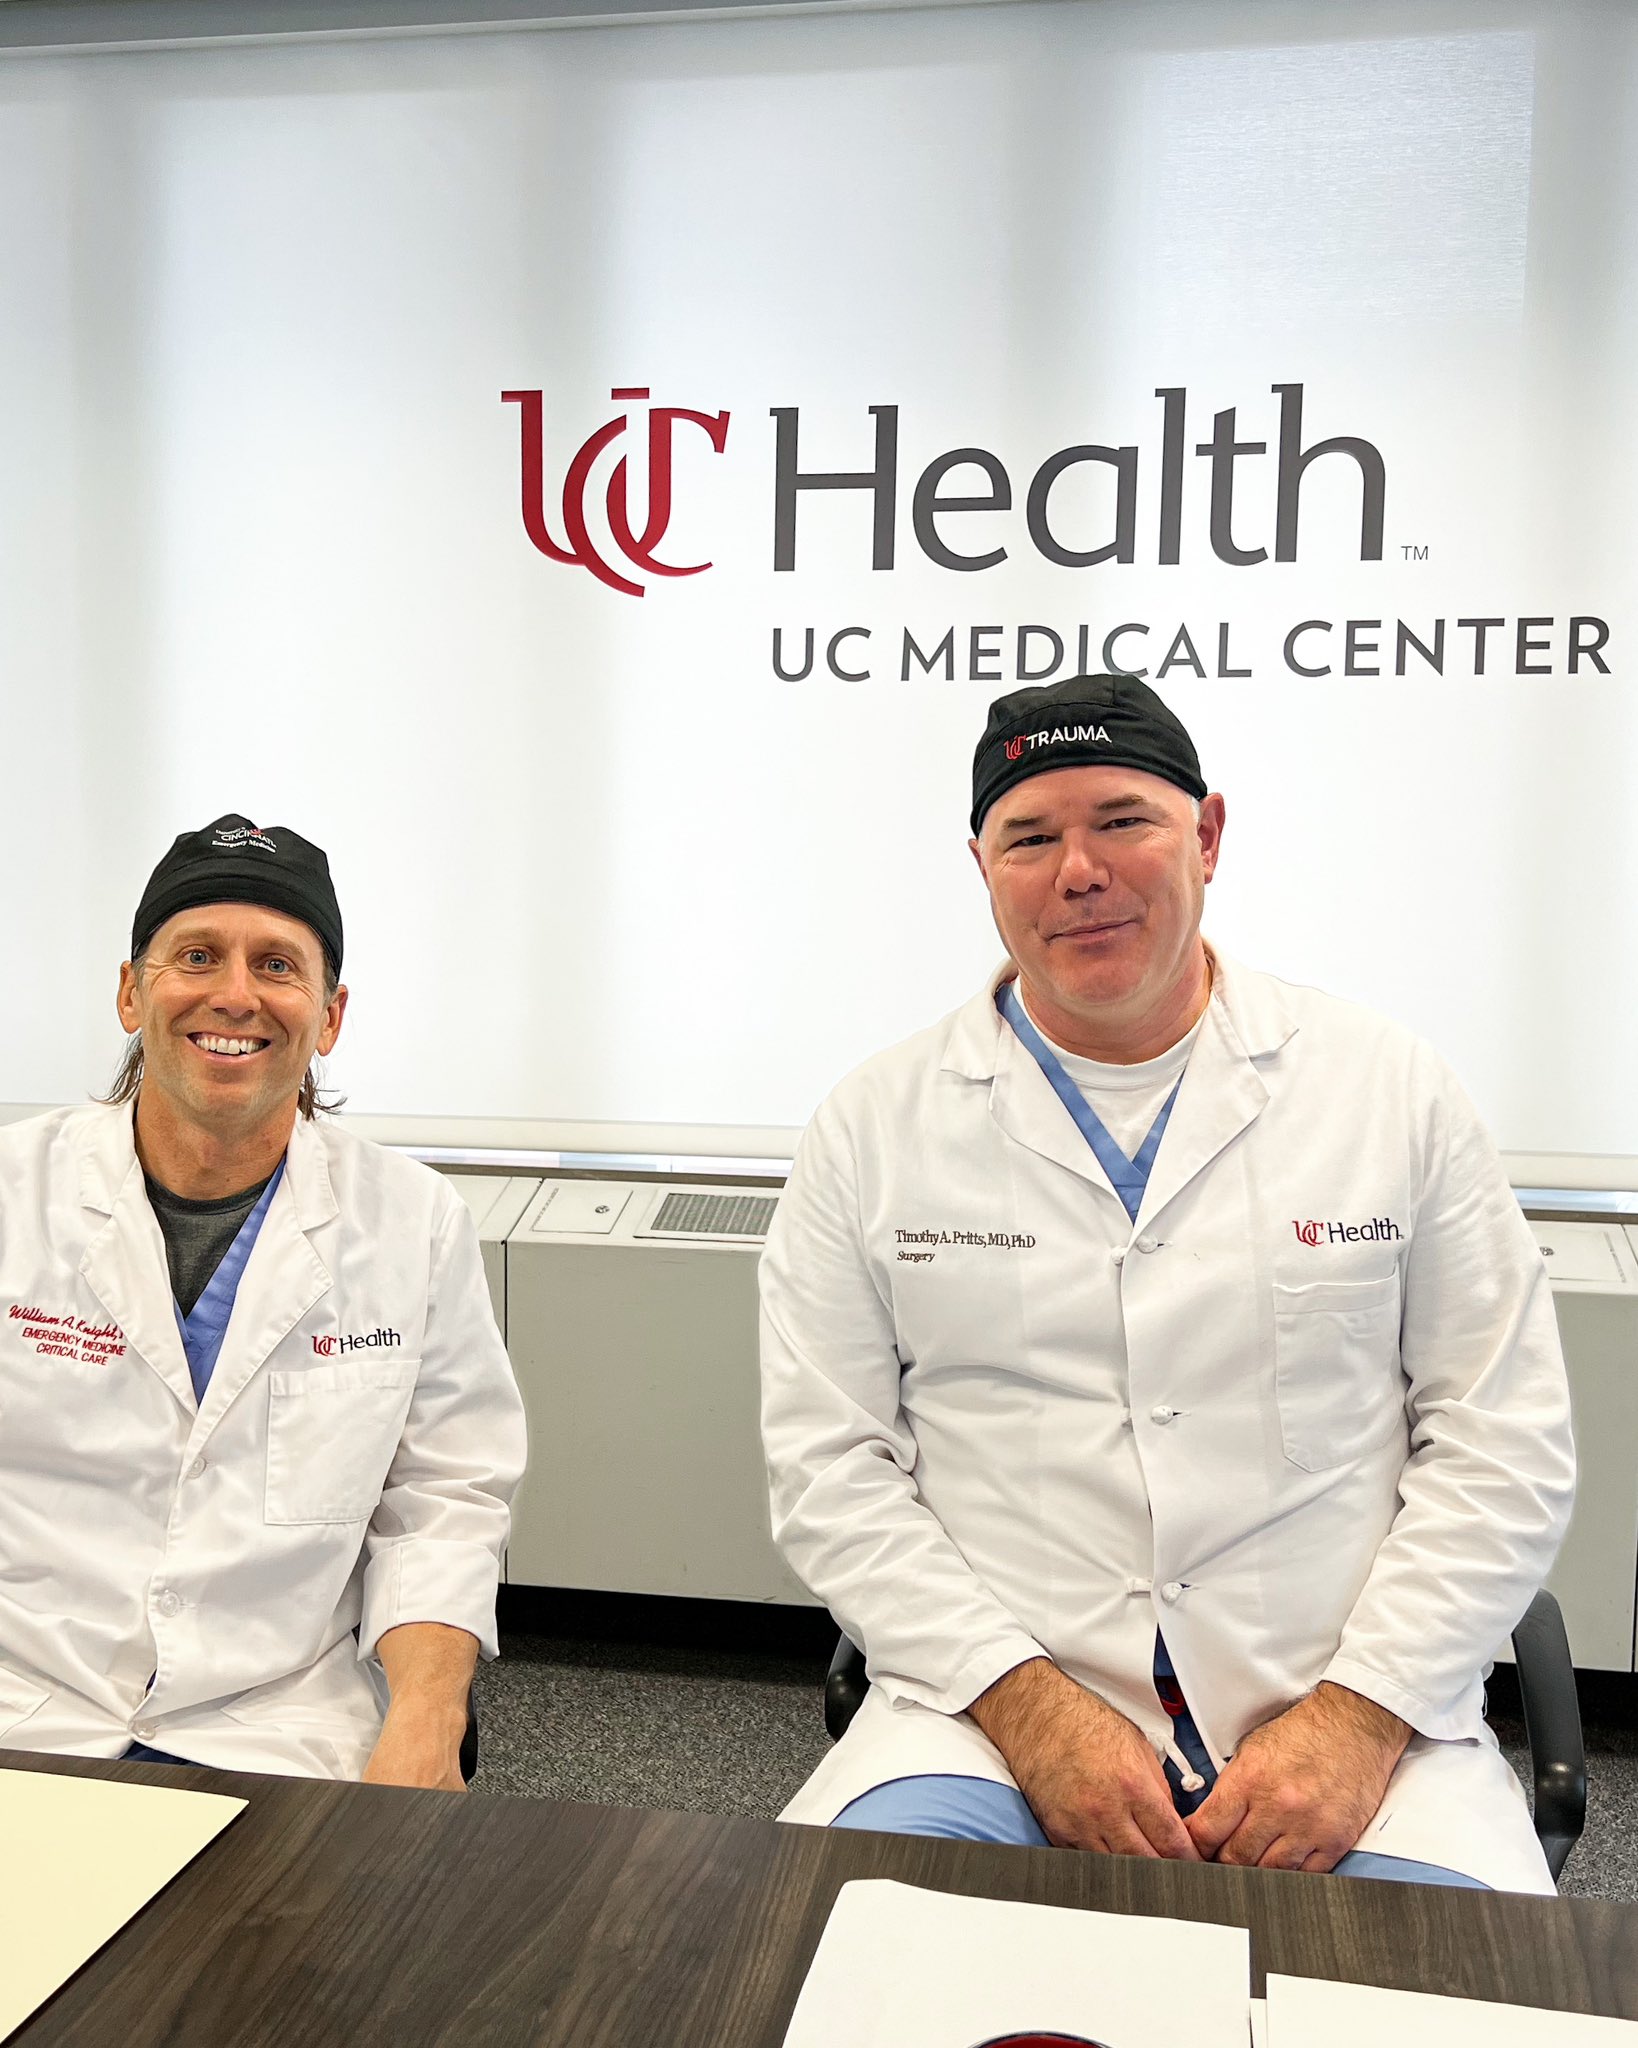 UC Health on X: 'We cannot express how proud we are of Dr. Pritts and Dr.  Knight's leadership and thankful for the entire care team supporting Damar  Hamlin. As the region's only